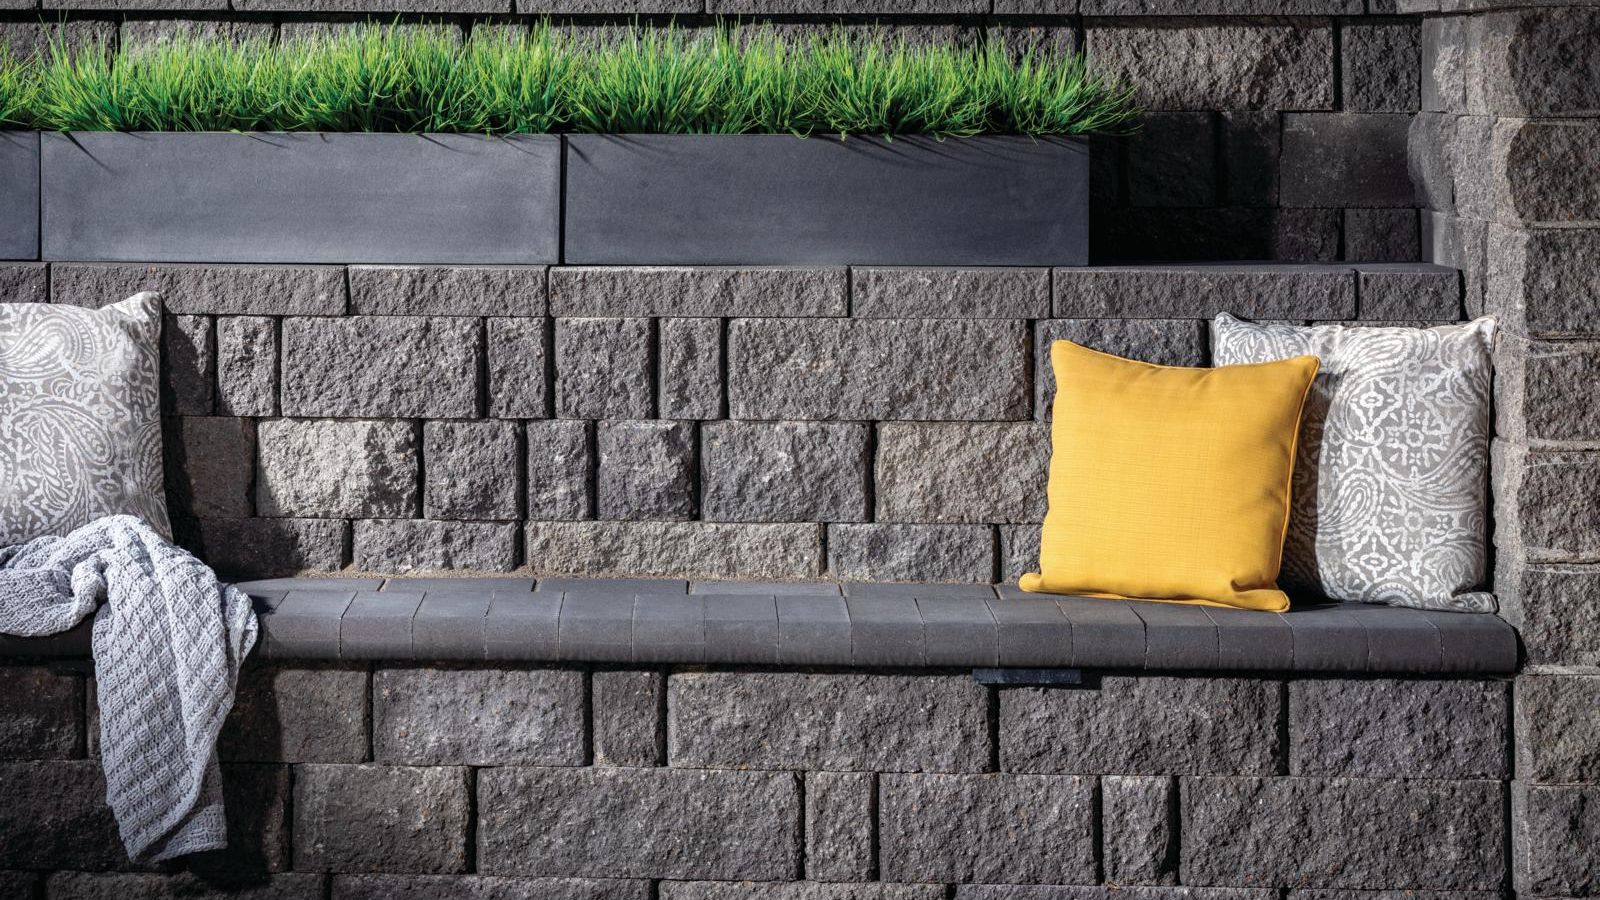 Highland Stone® retaining wall showcasing its intricate design and stability.